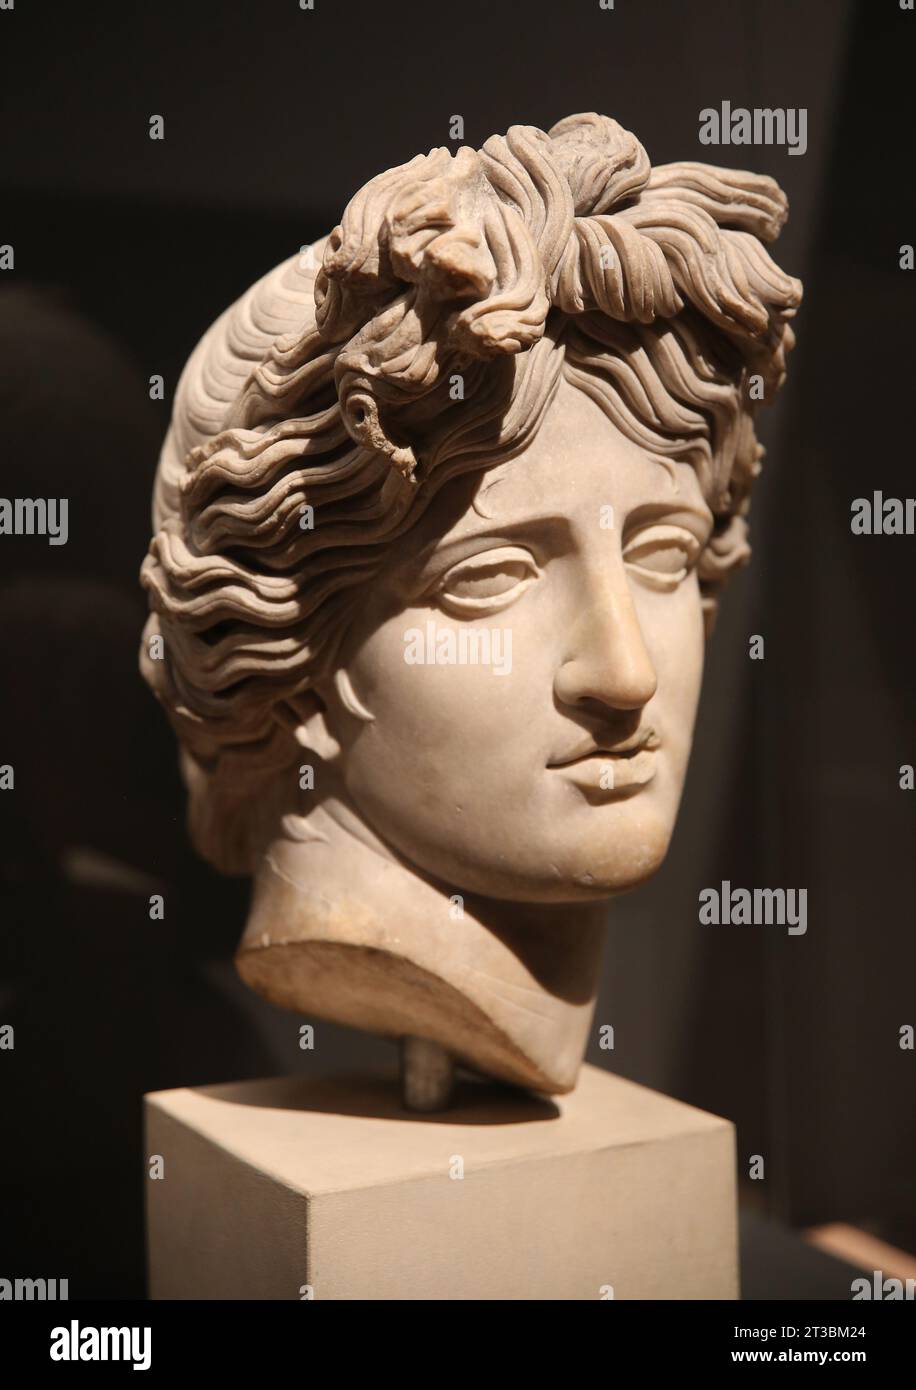 head of the god Apollo. Found in Rome, Italy. 3rd century AD Marble. The Human Image: Art, Identities and Symbolism. Exposition organised by the Briti Stock Photo